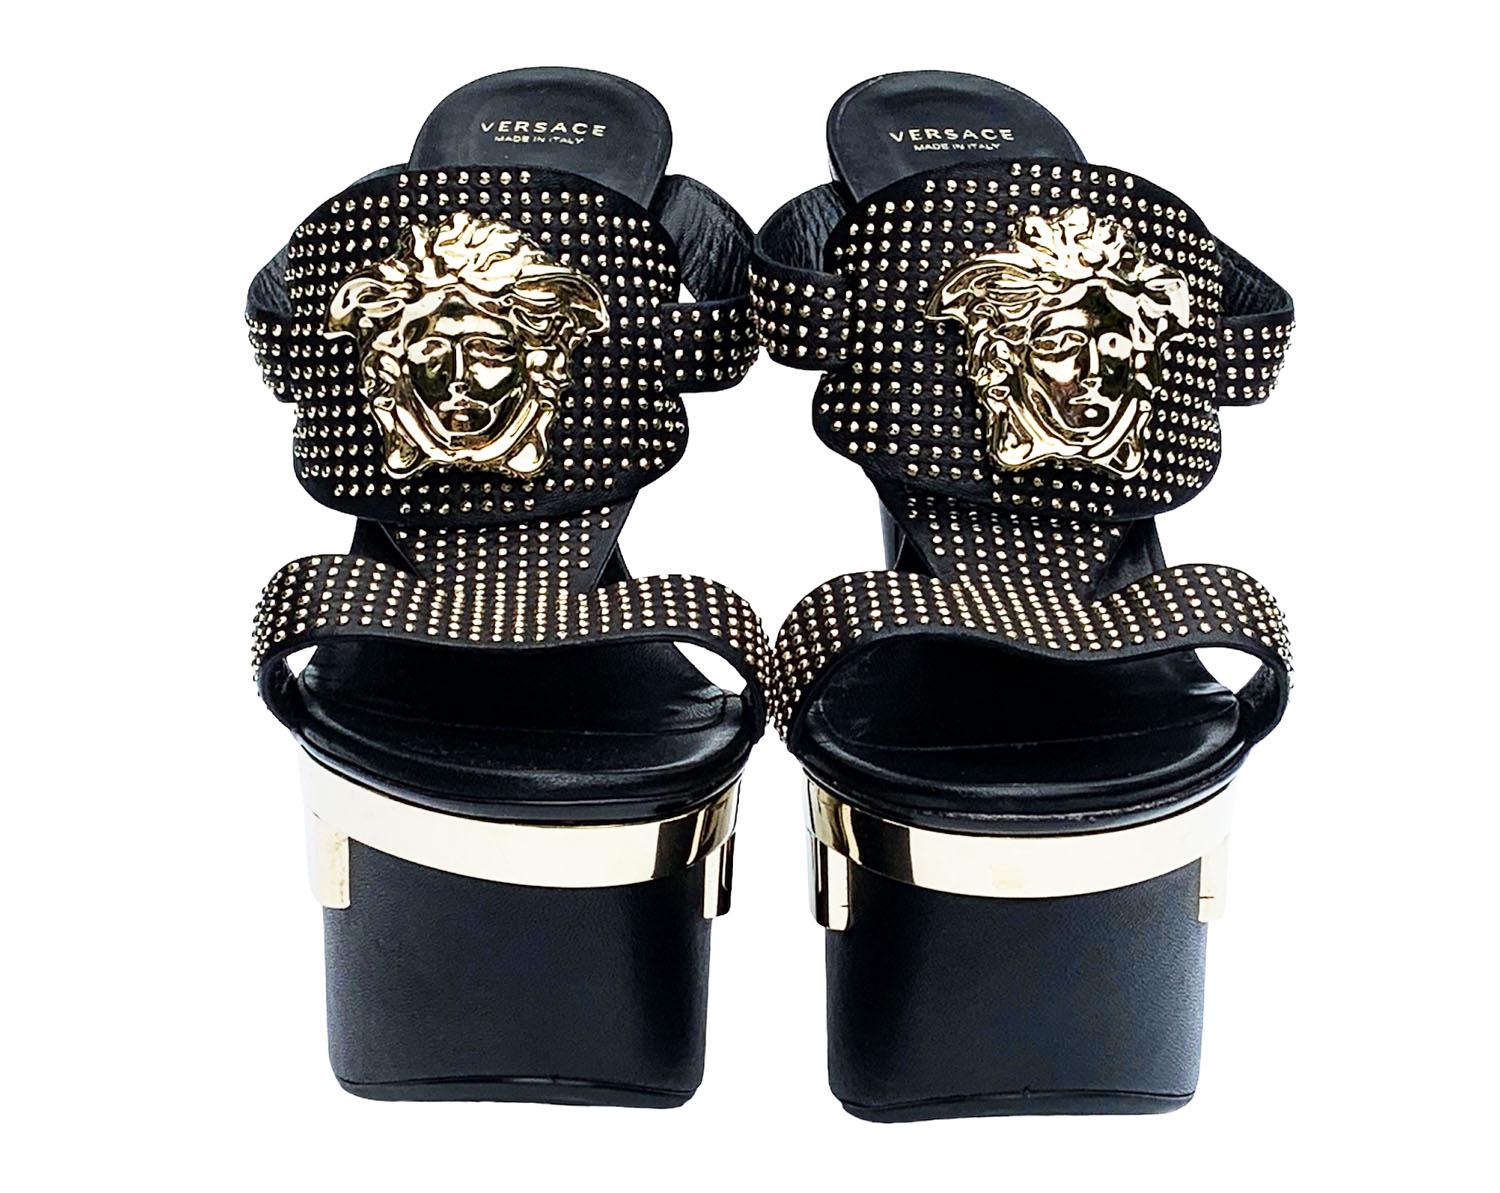 NWT Versace Black Gold Studded 3 - X Platform Sandals Shoes Italian 40 - US 10 In New Condition For Sale In Montgomery, TX